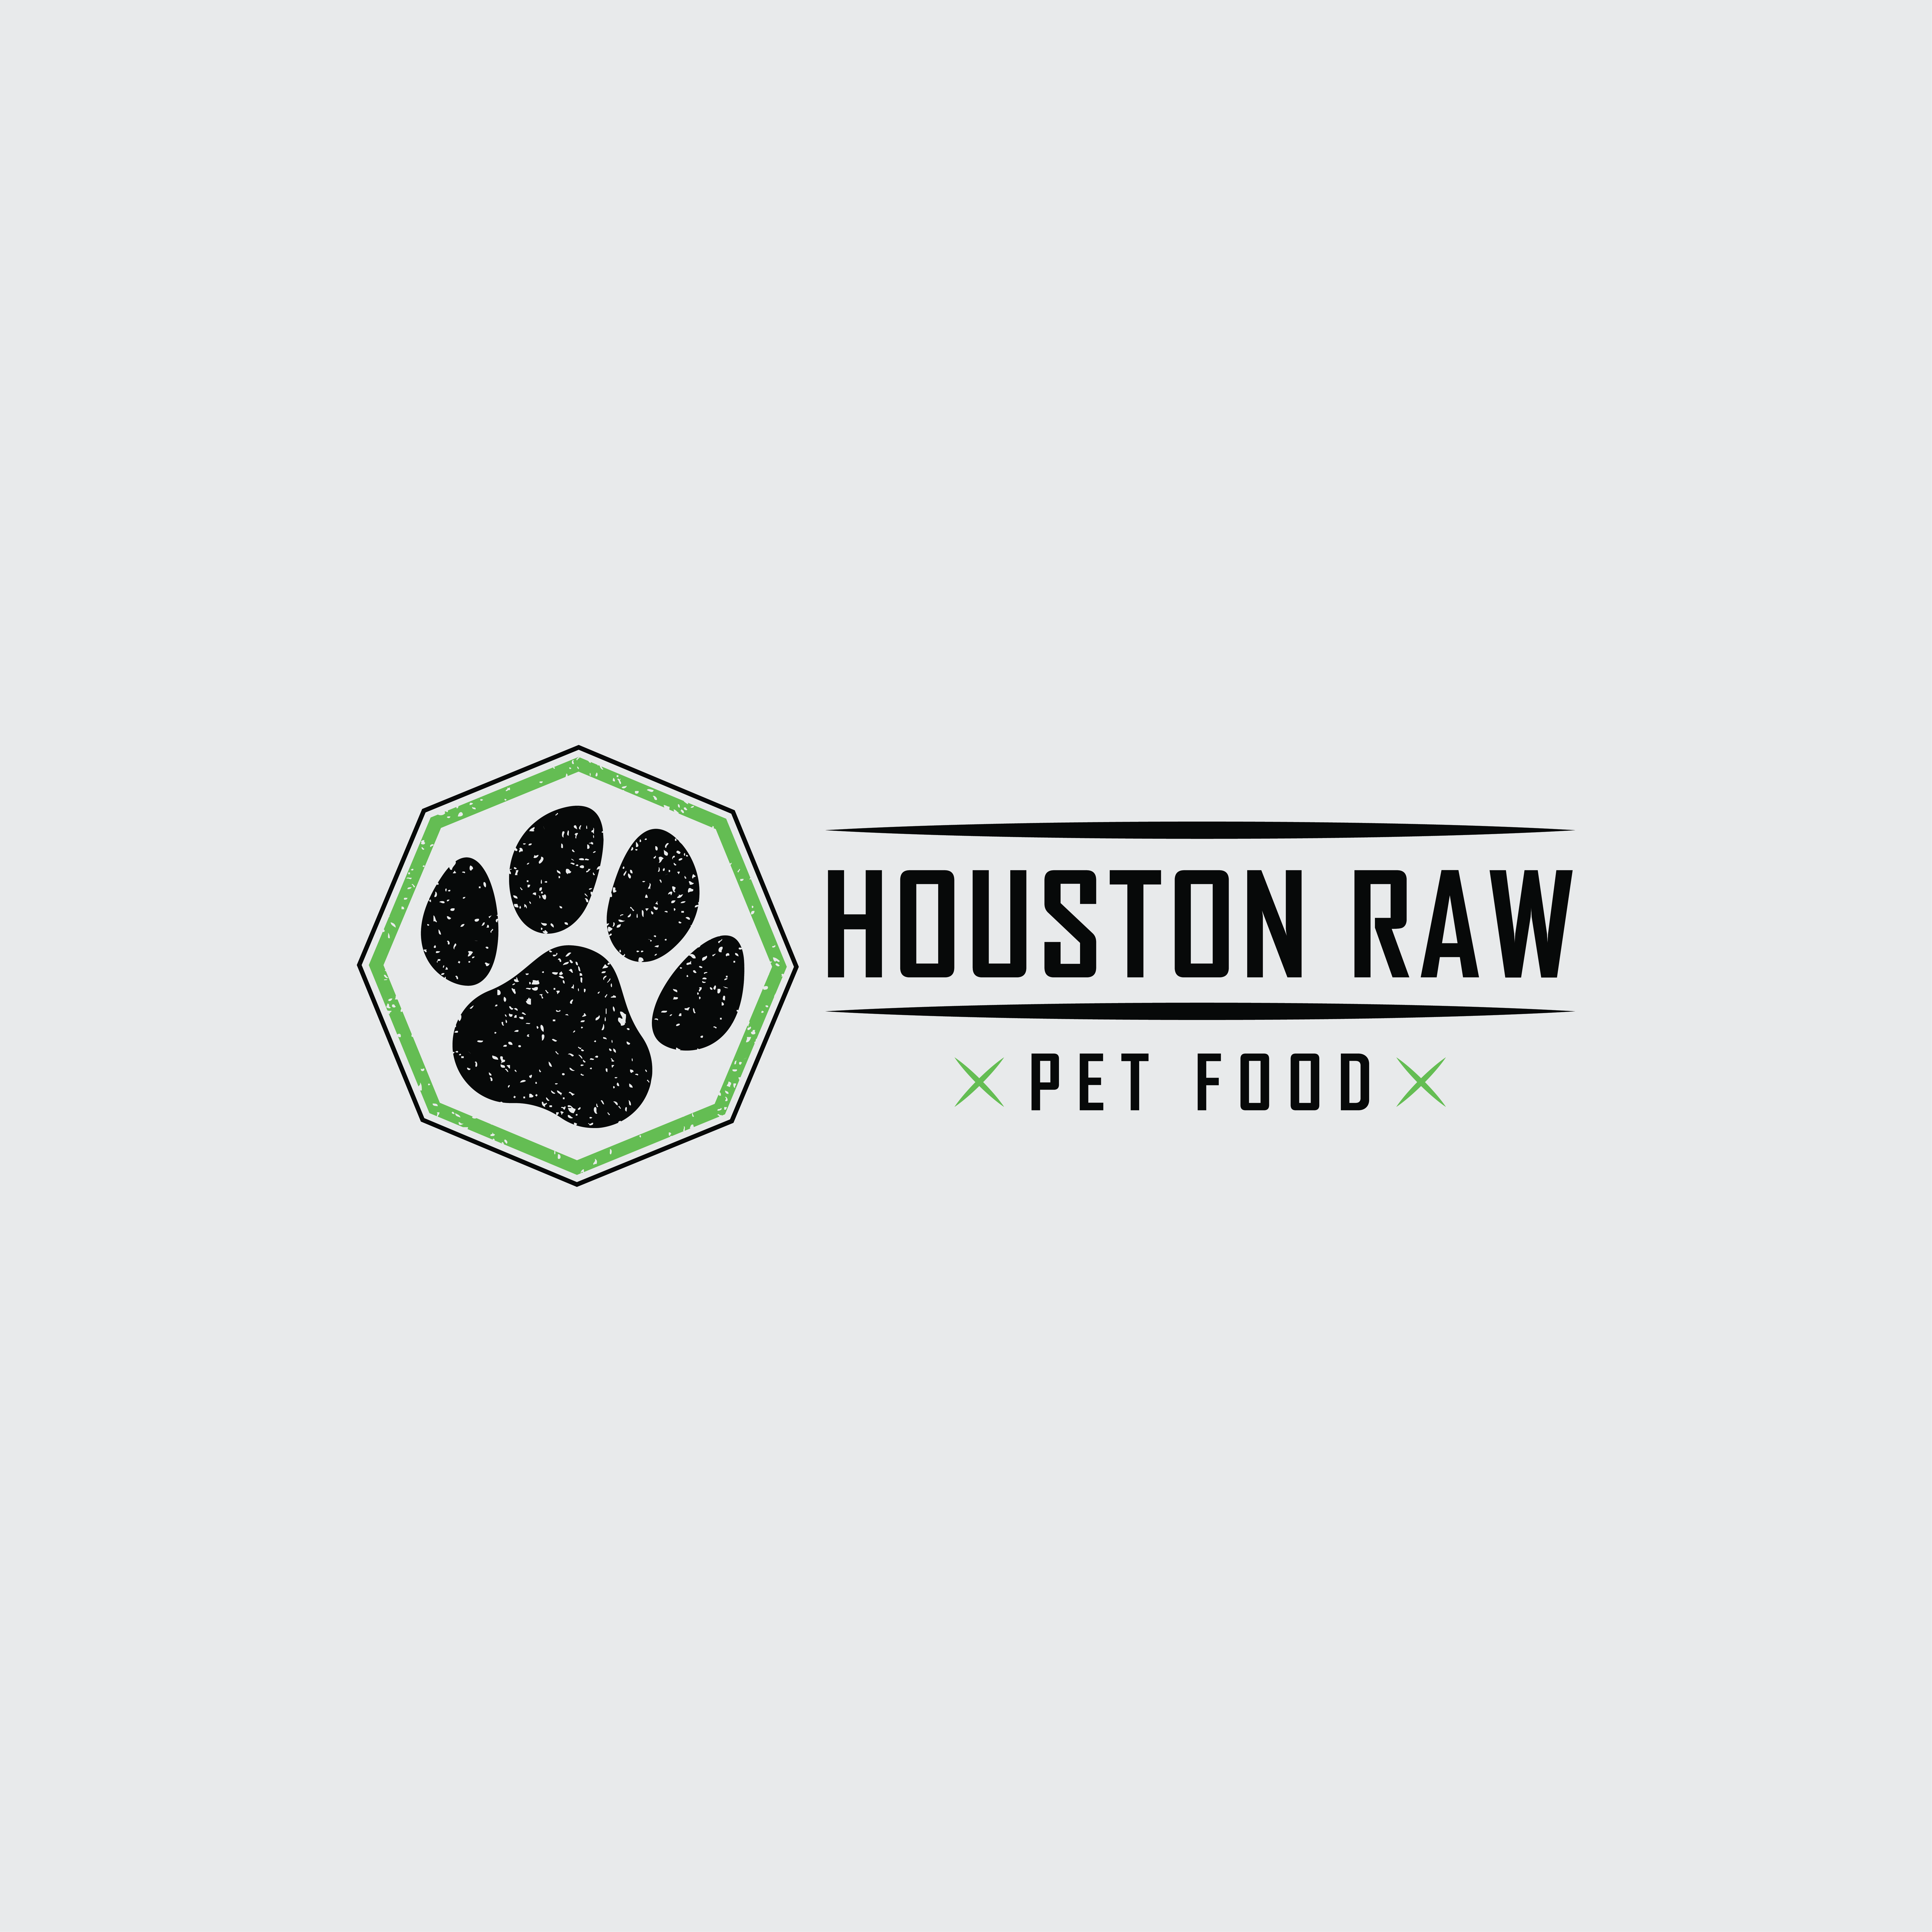 Houston Raw Pet Food Announces the Launch of Texas Tribe, their Latest Product Line